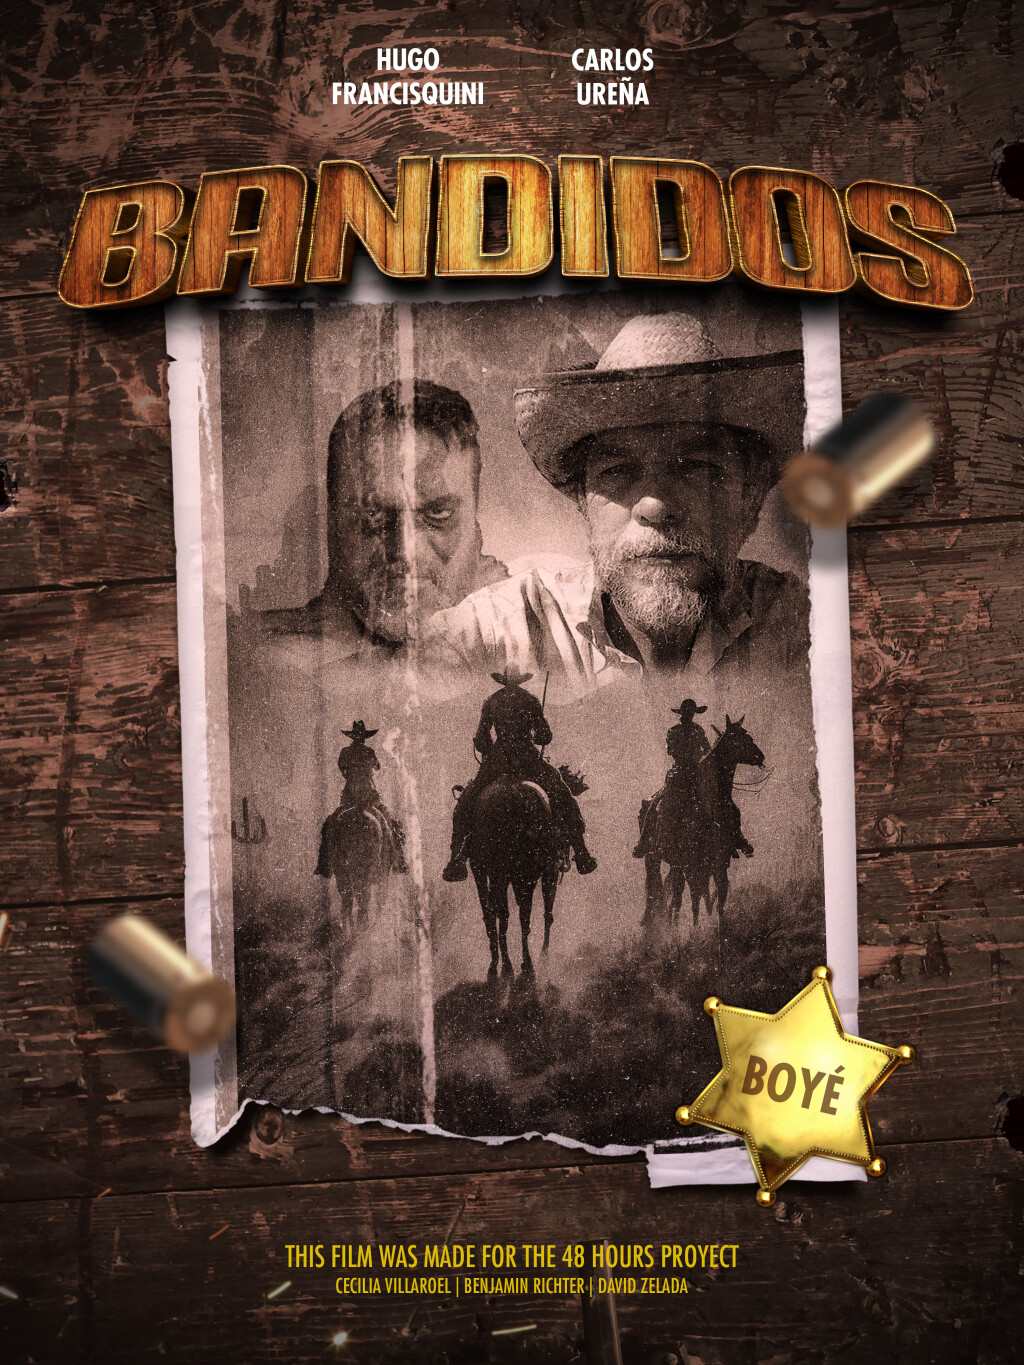 Filmposter for Bandidos